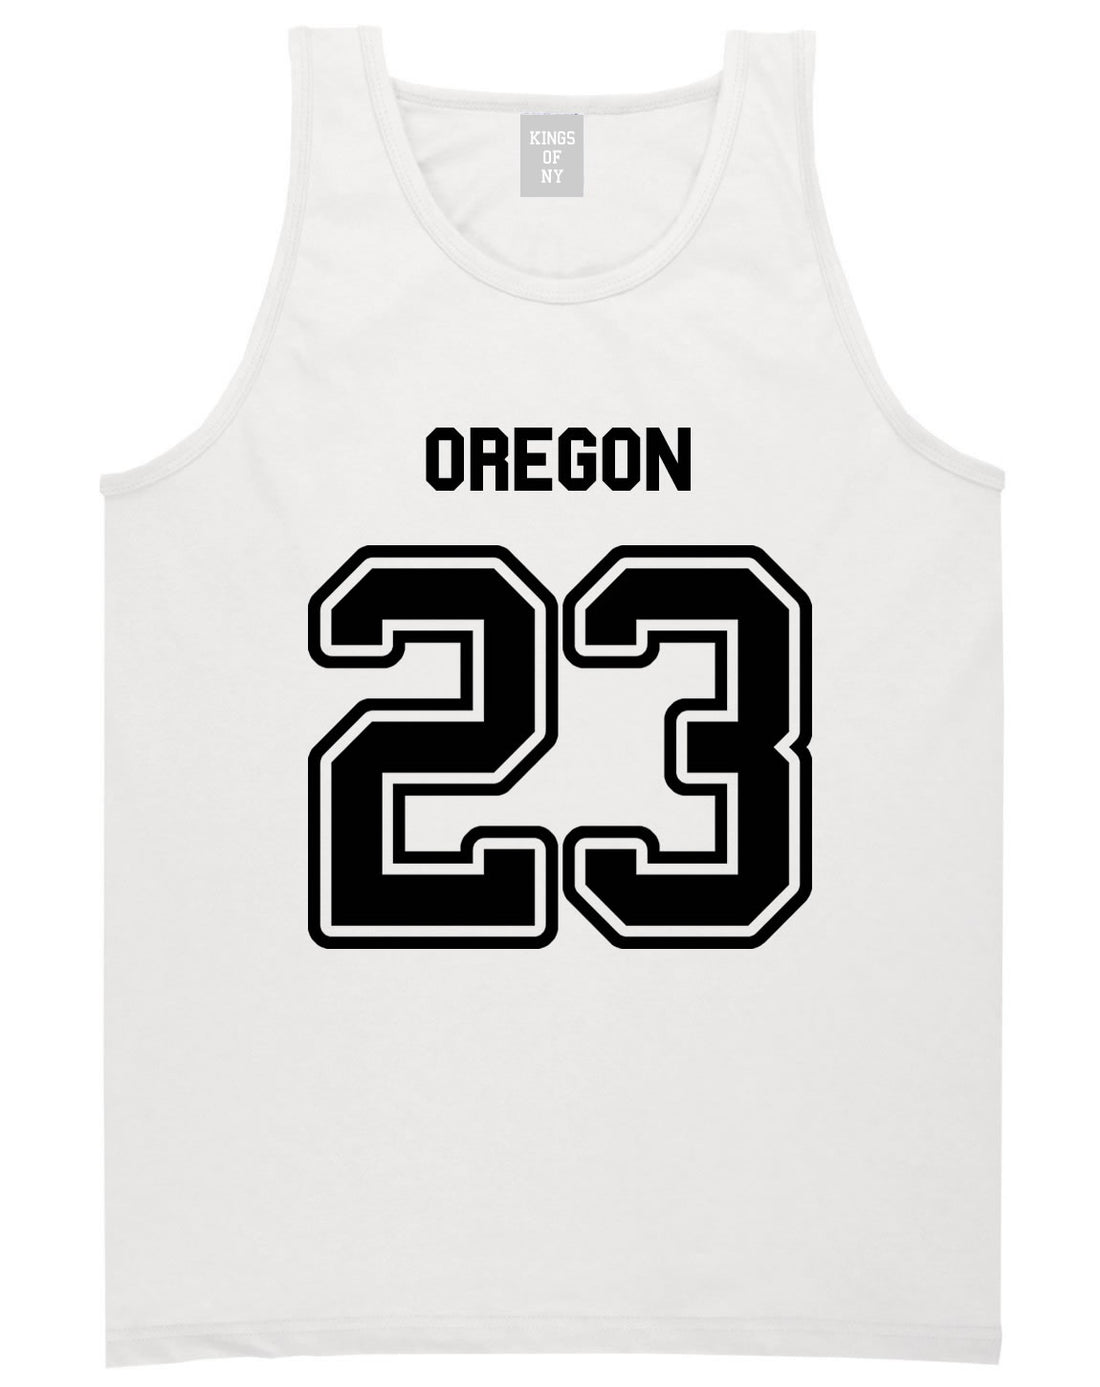 Sport Style Oregon 23 Team State Jersey Mens Tank Top By Kings Of NY